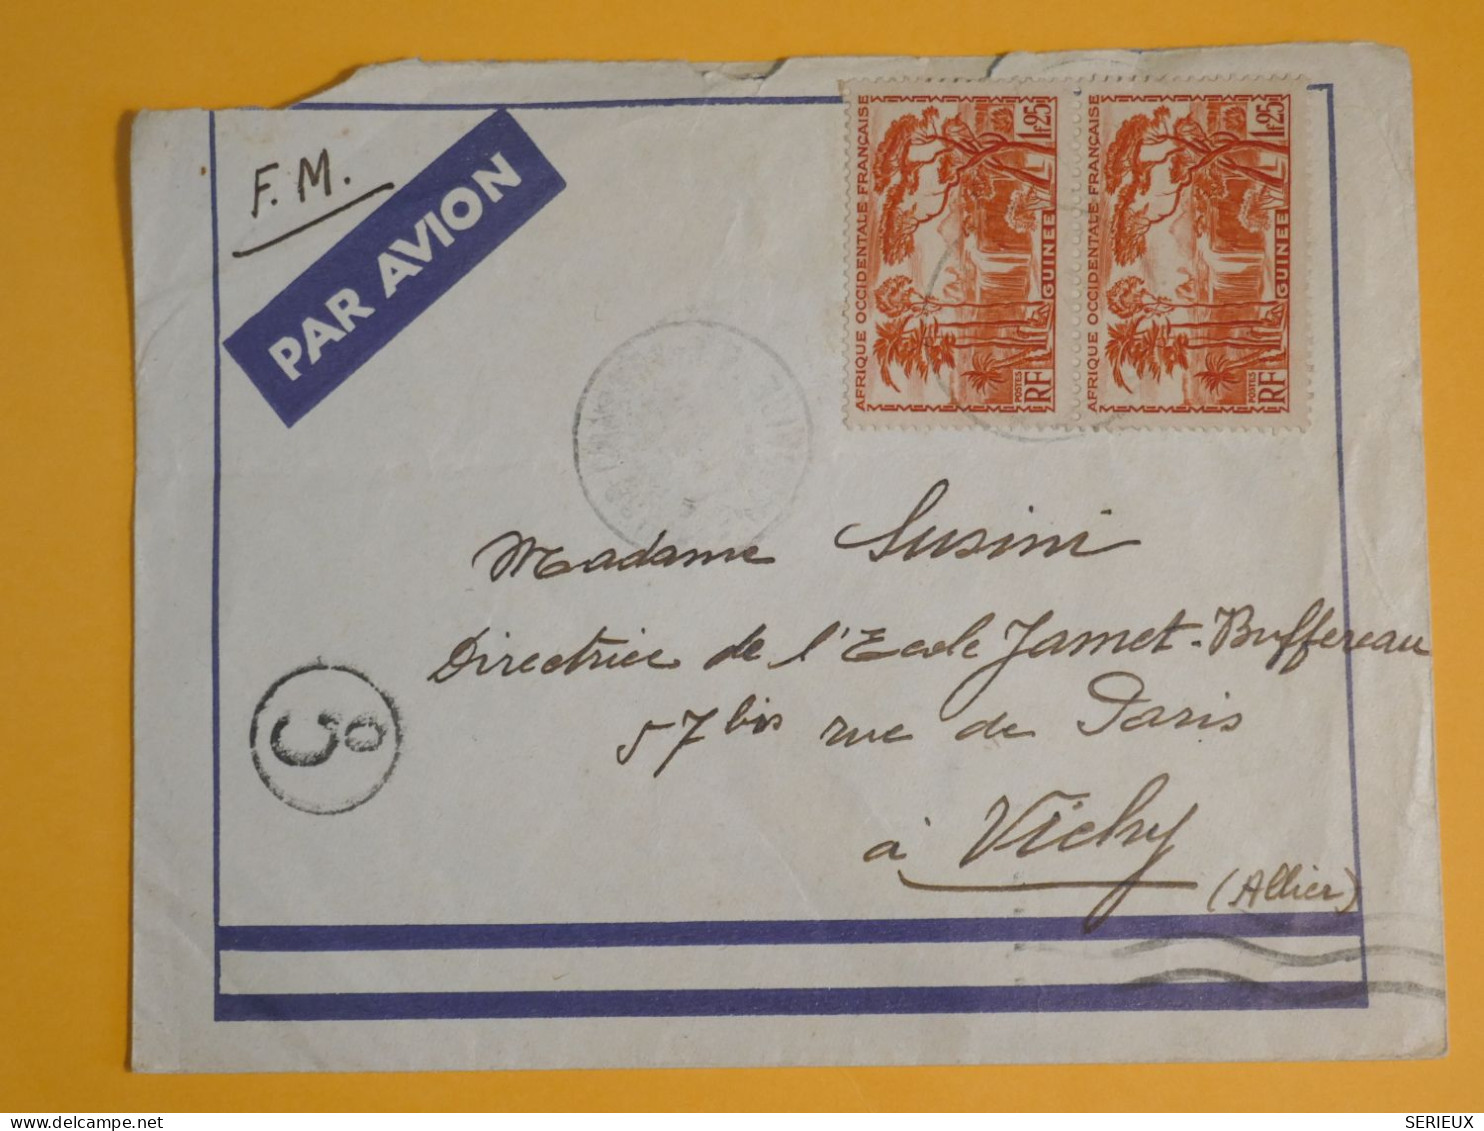 DM6 AOF  GUINEE  BELLE   LETTRE FM   1940 A VICHY FRANCE ++PAIRE N°164  + AFF.   INTERESSANT+ + - Lettres & Documents